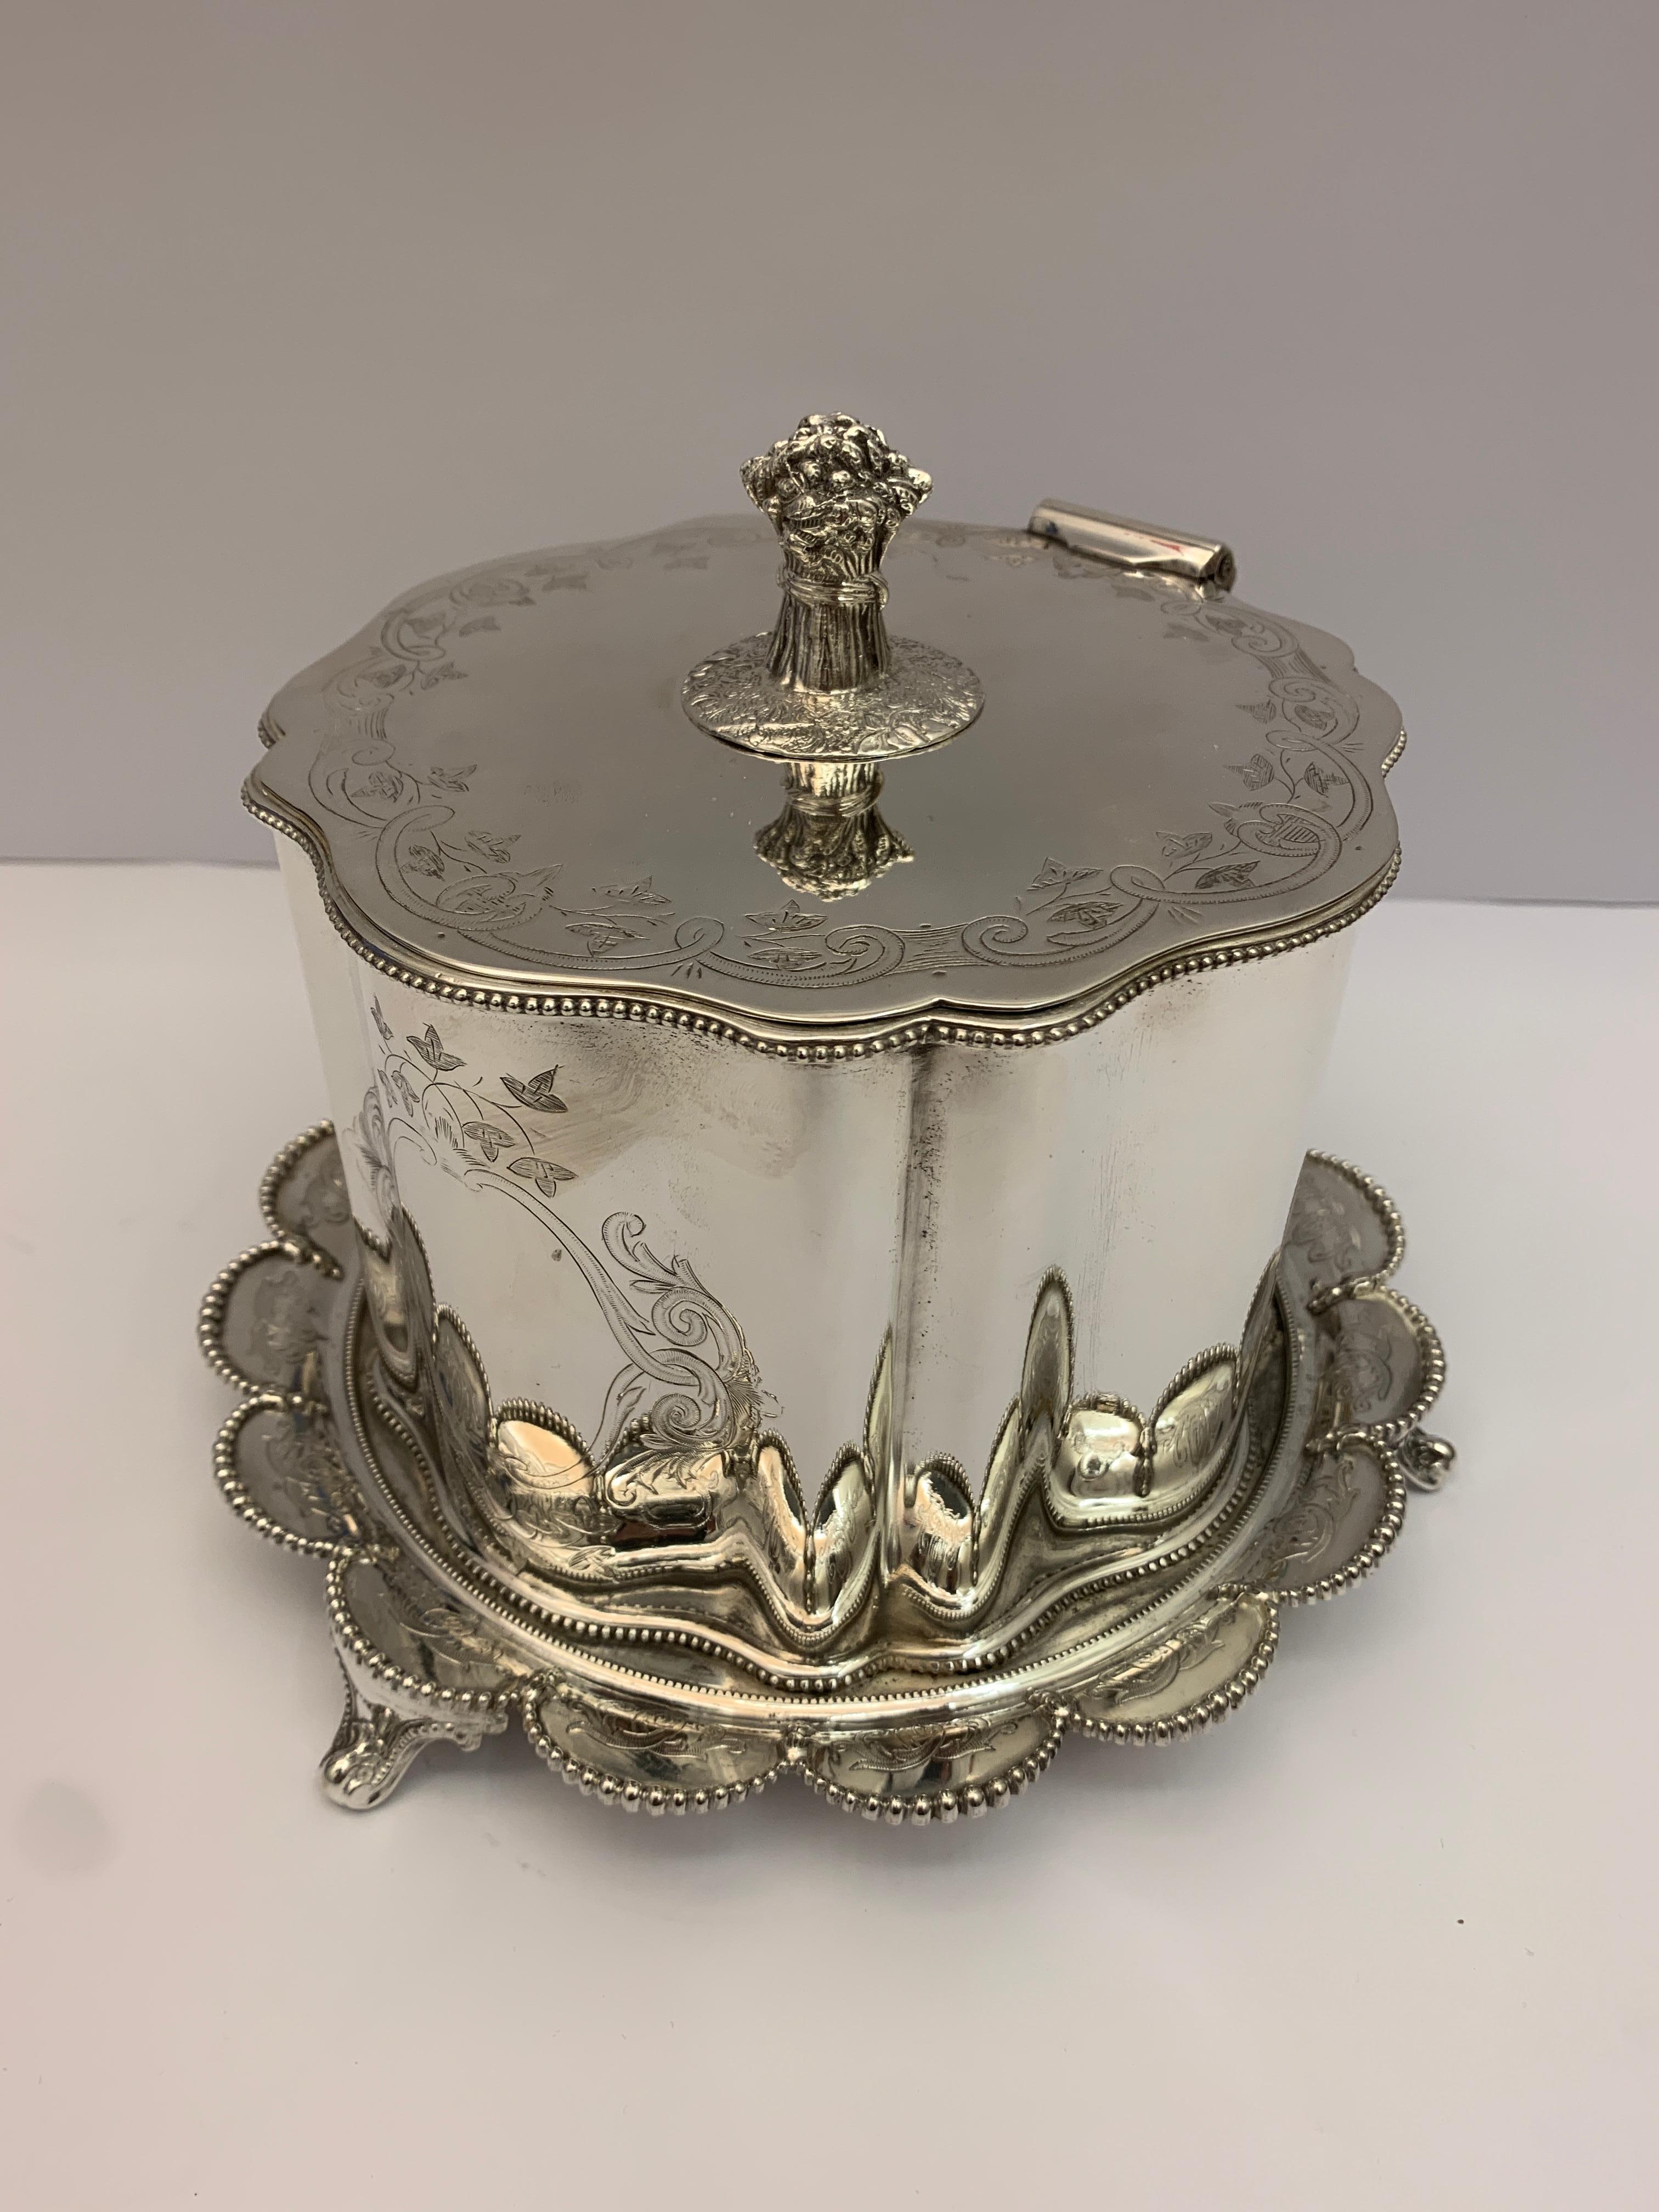 Beautifully styled silver plate biscuit or cookie box made in 1900.

With hinged lid and ornate decoration throughout, delicate rim beading and floral decoration. 
Gilt interior.